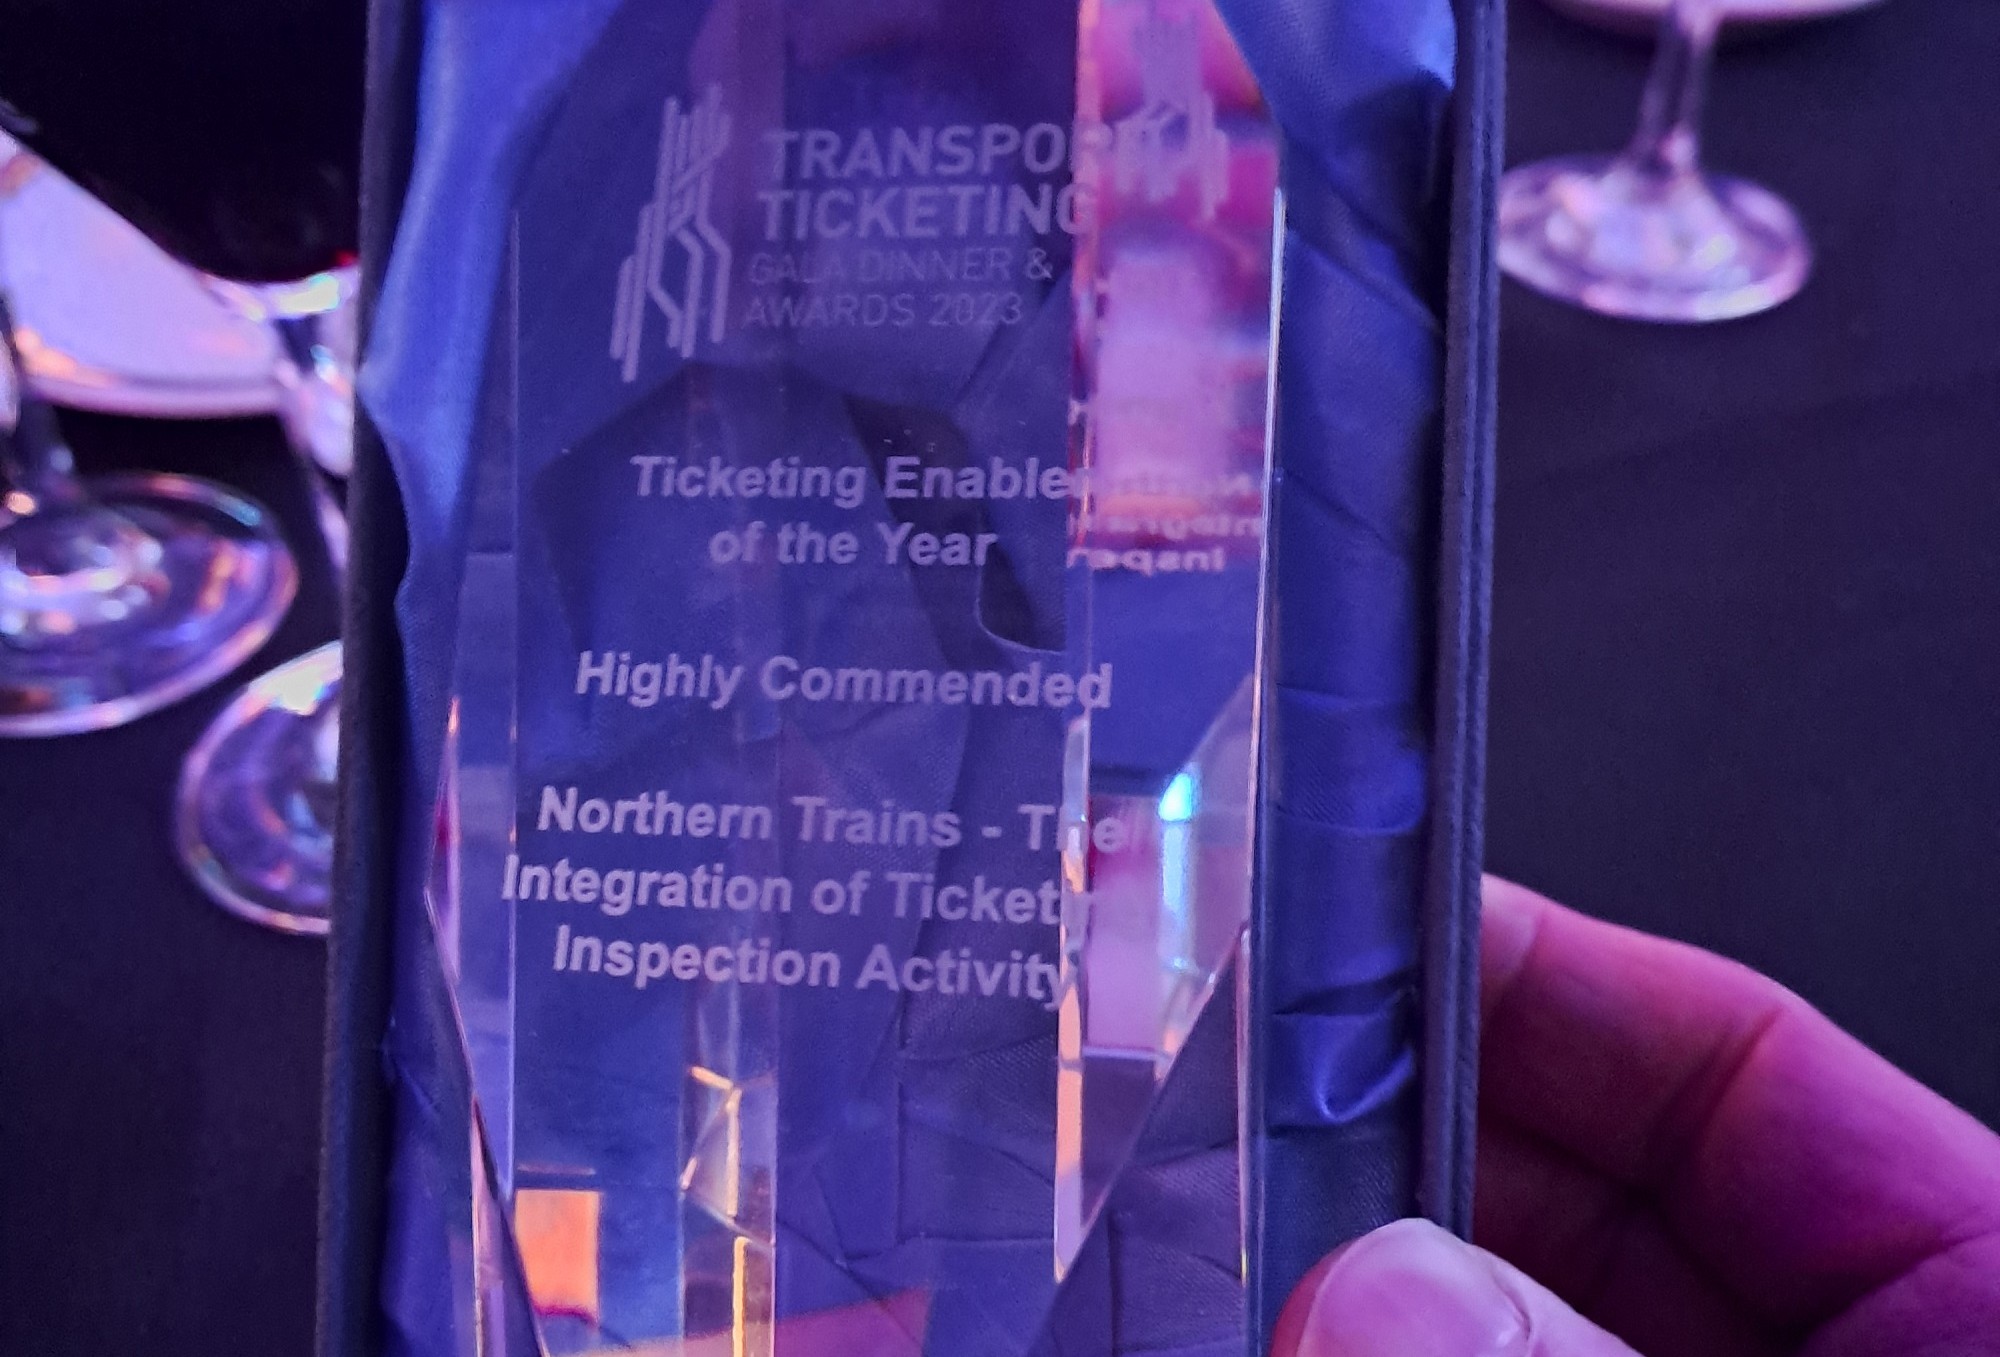 image-shows-ticketing-enabler-of-the-year-award-from-the-transport-ticketing-awards